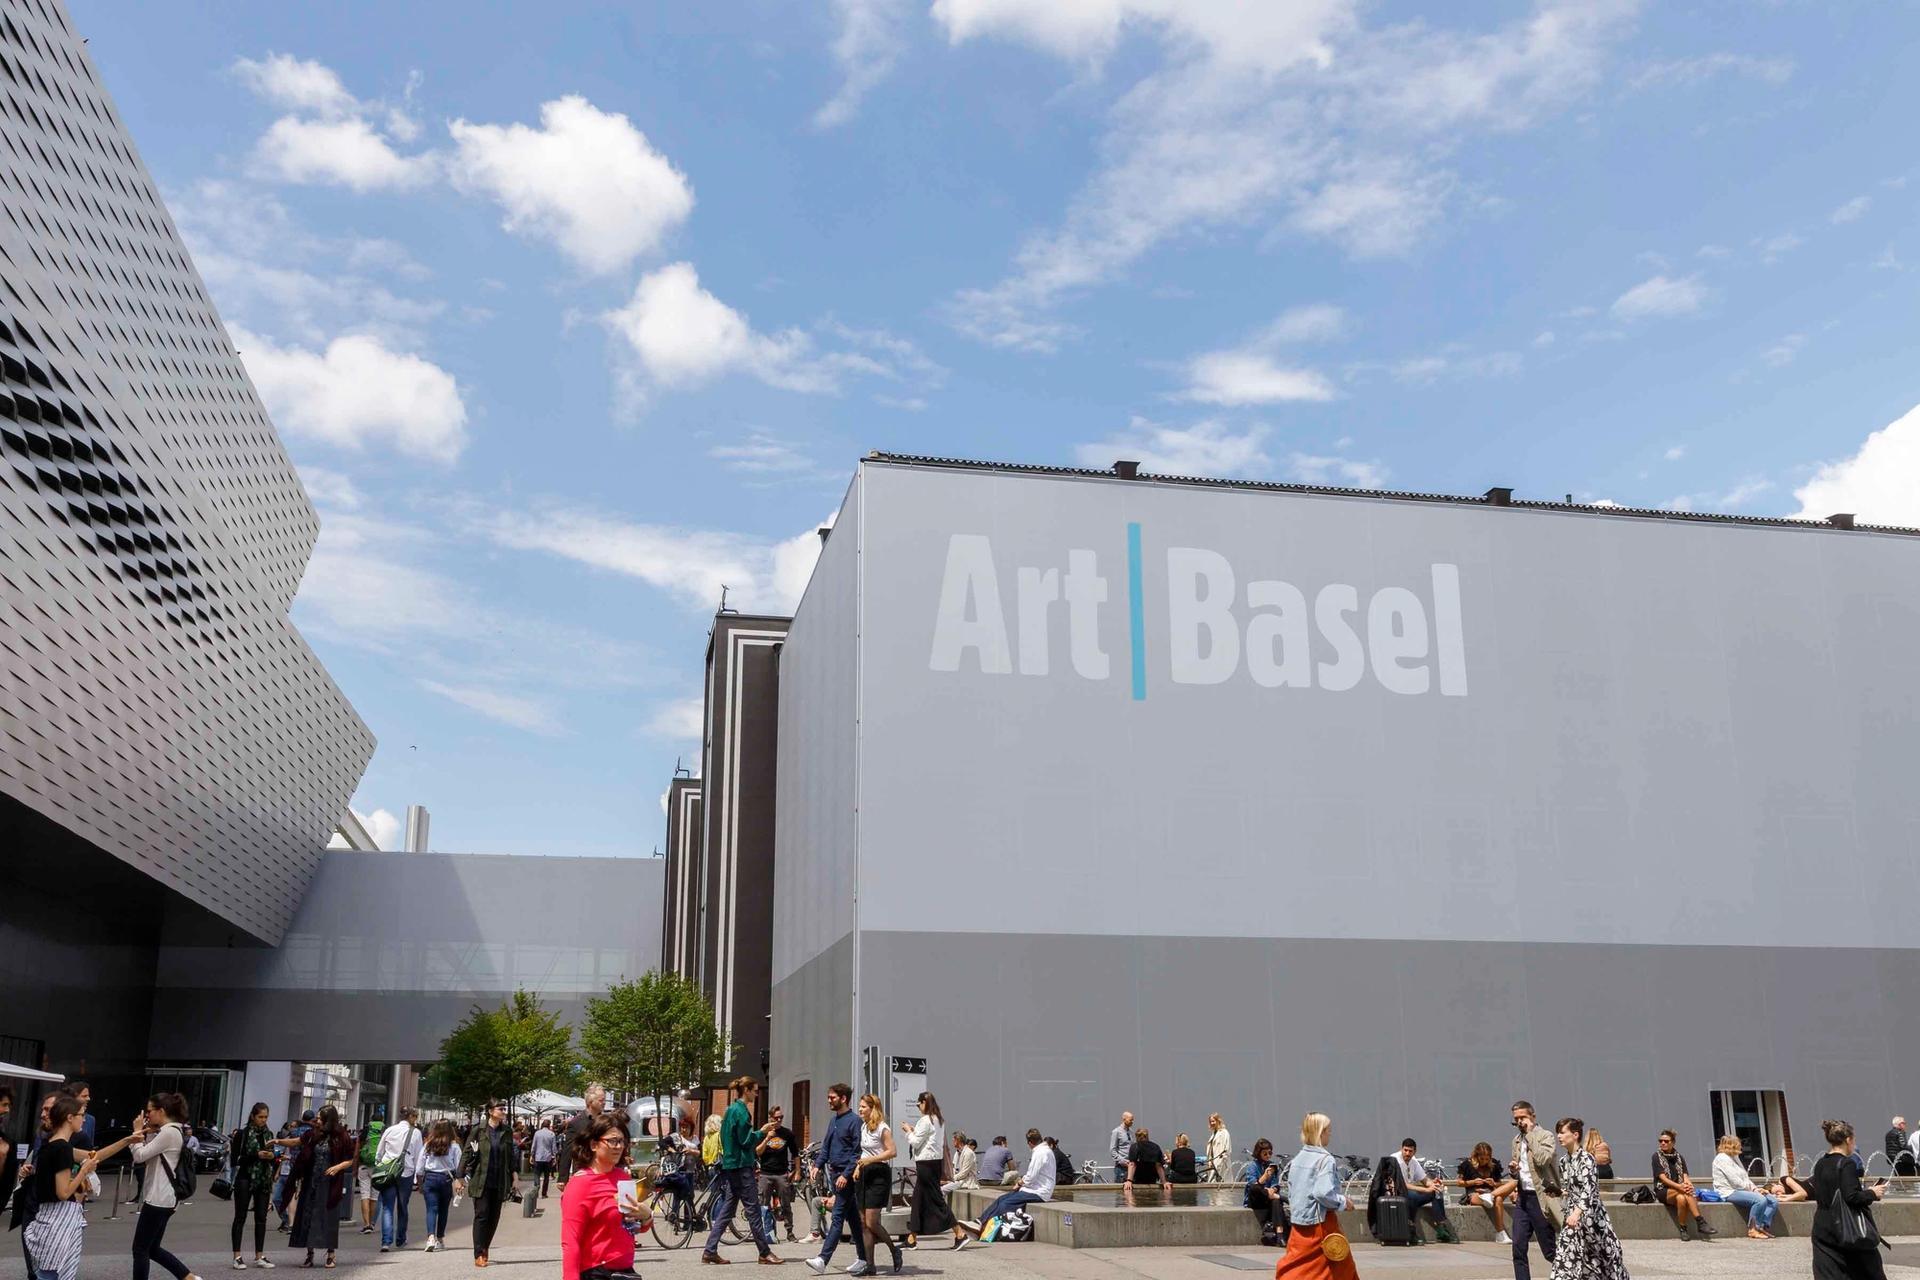 Art Basel in Basel was postponed from June to September due to Covid-19 but fears are mounting that it will still not be able to take place in the autumn due to the ongoing pandemic © Art Basel